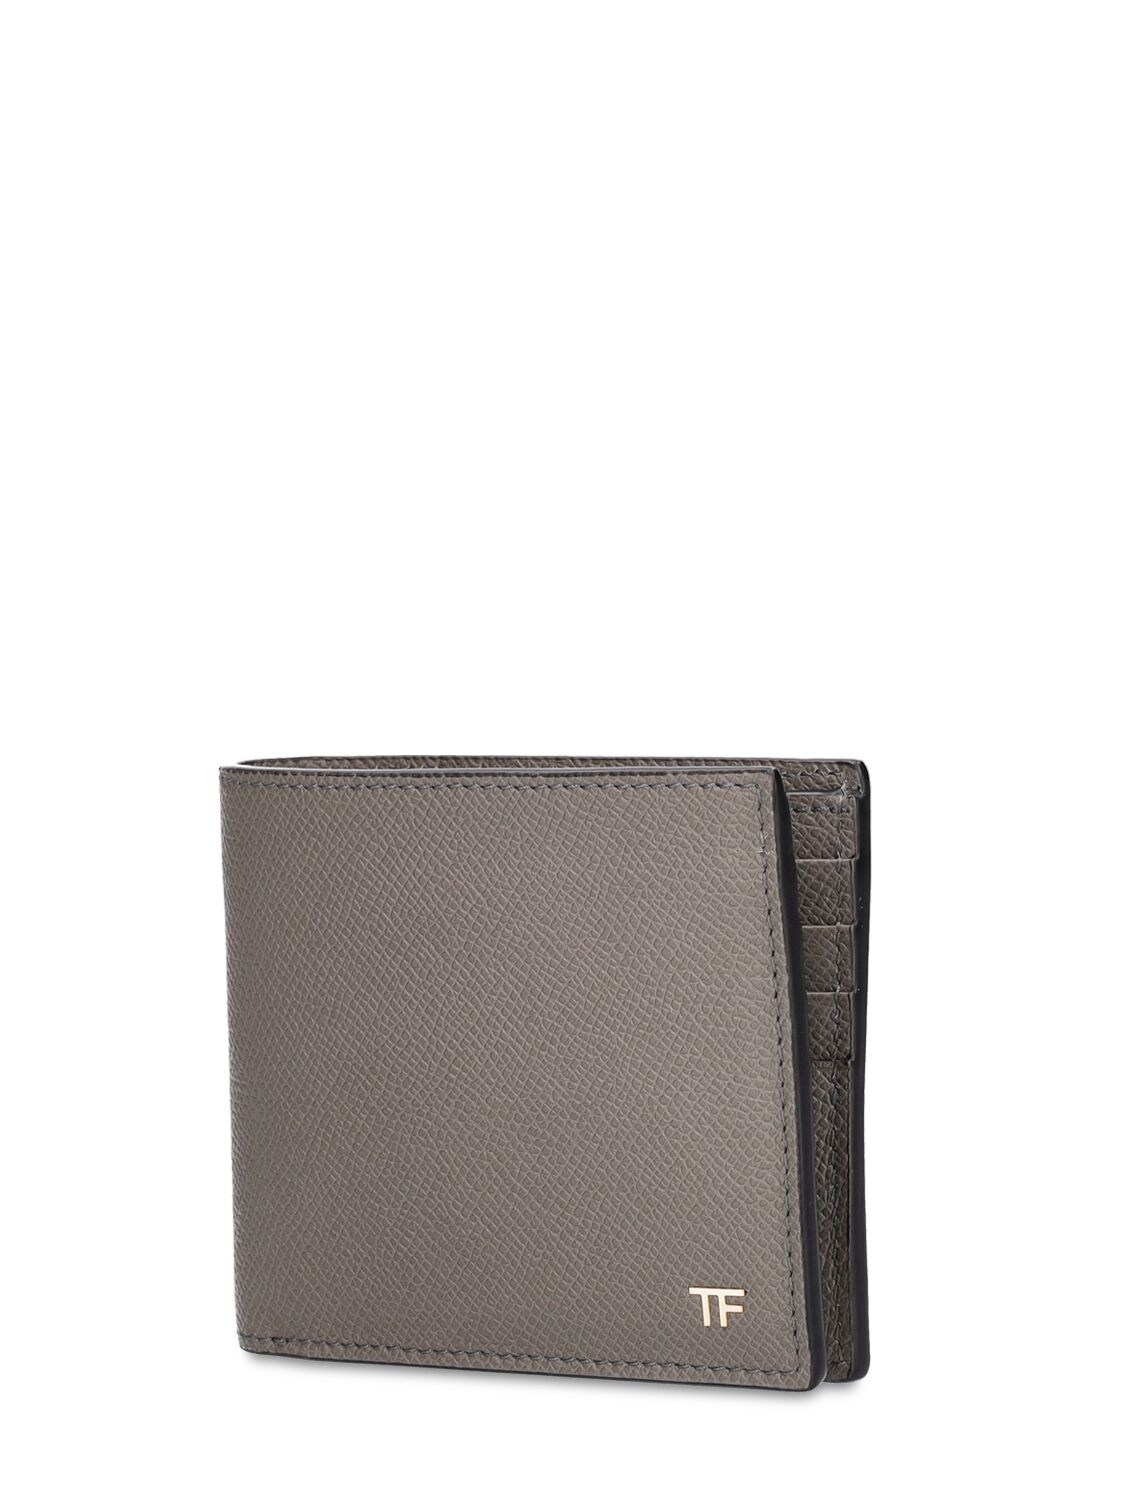 Tom Ford Logo Leather Wallet In Grey | ModeSens